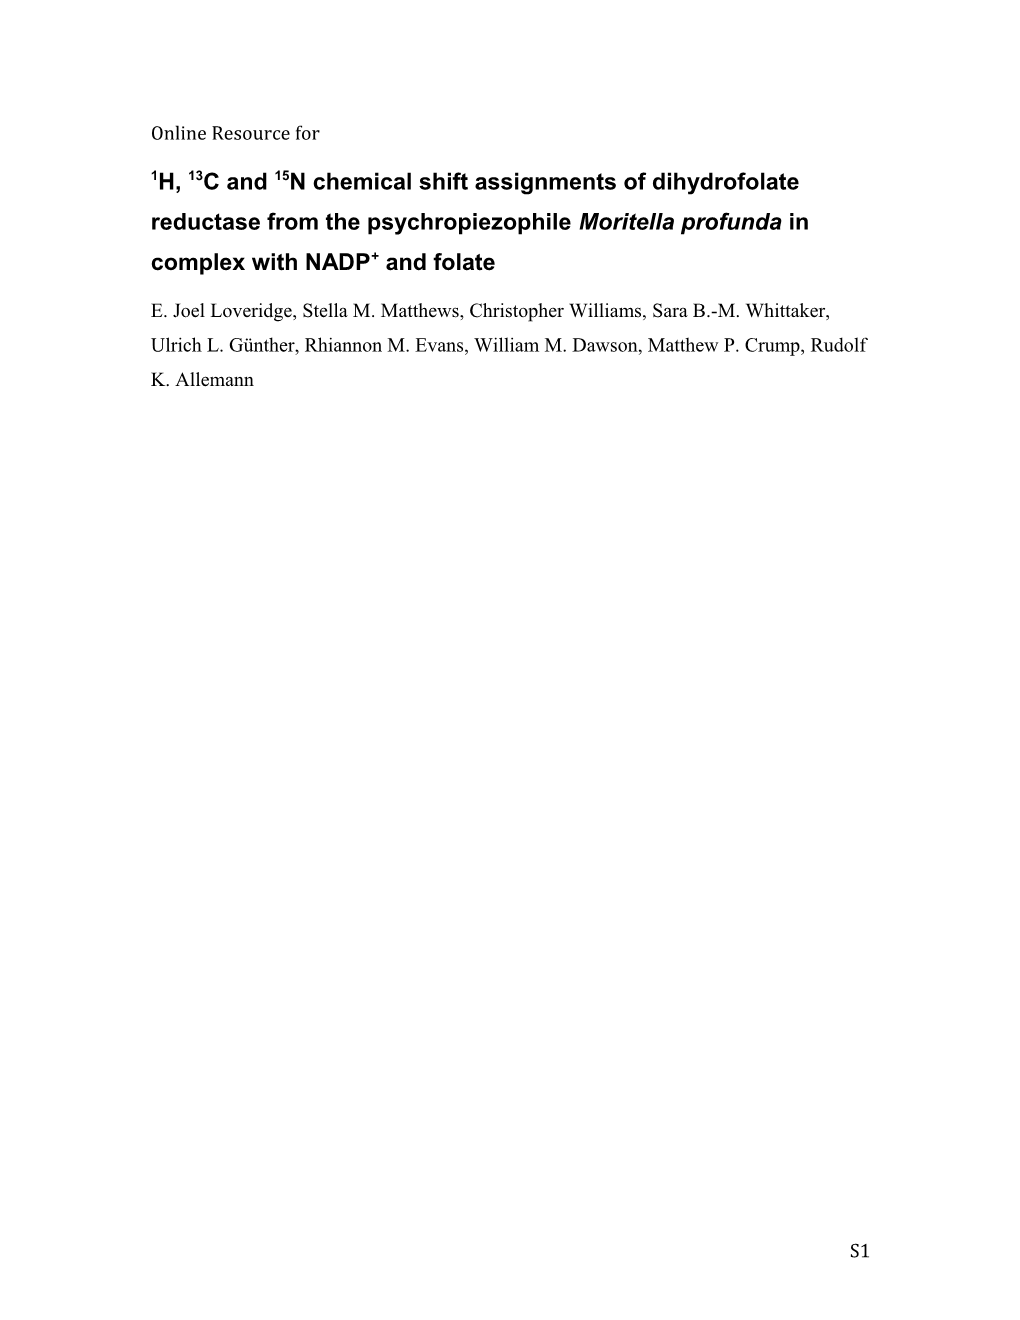 1H, 13C and 15N Chemical Shift Assignments of Dihydrofolate Reductase from The